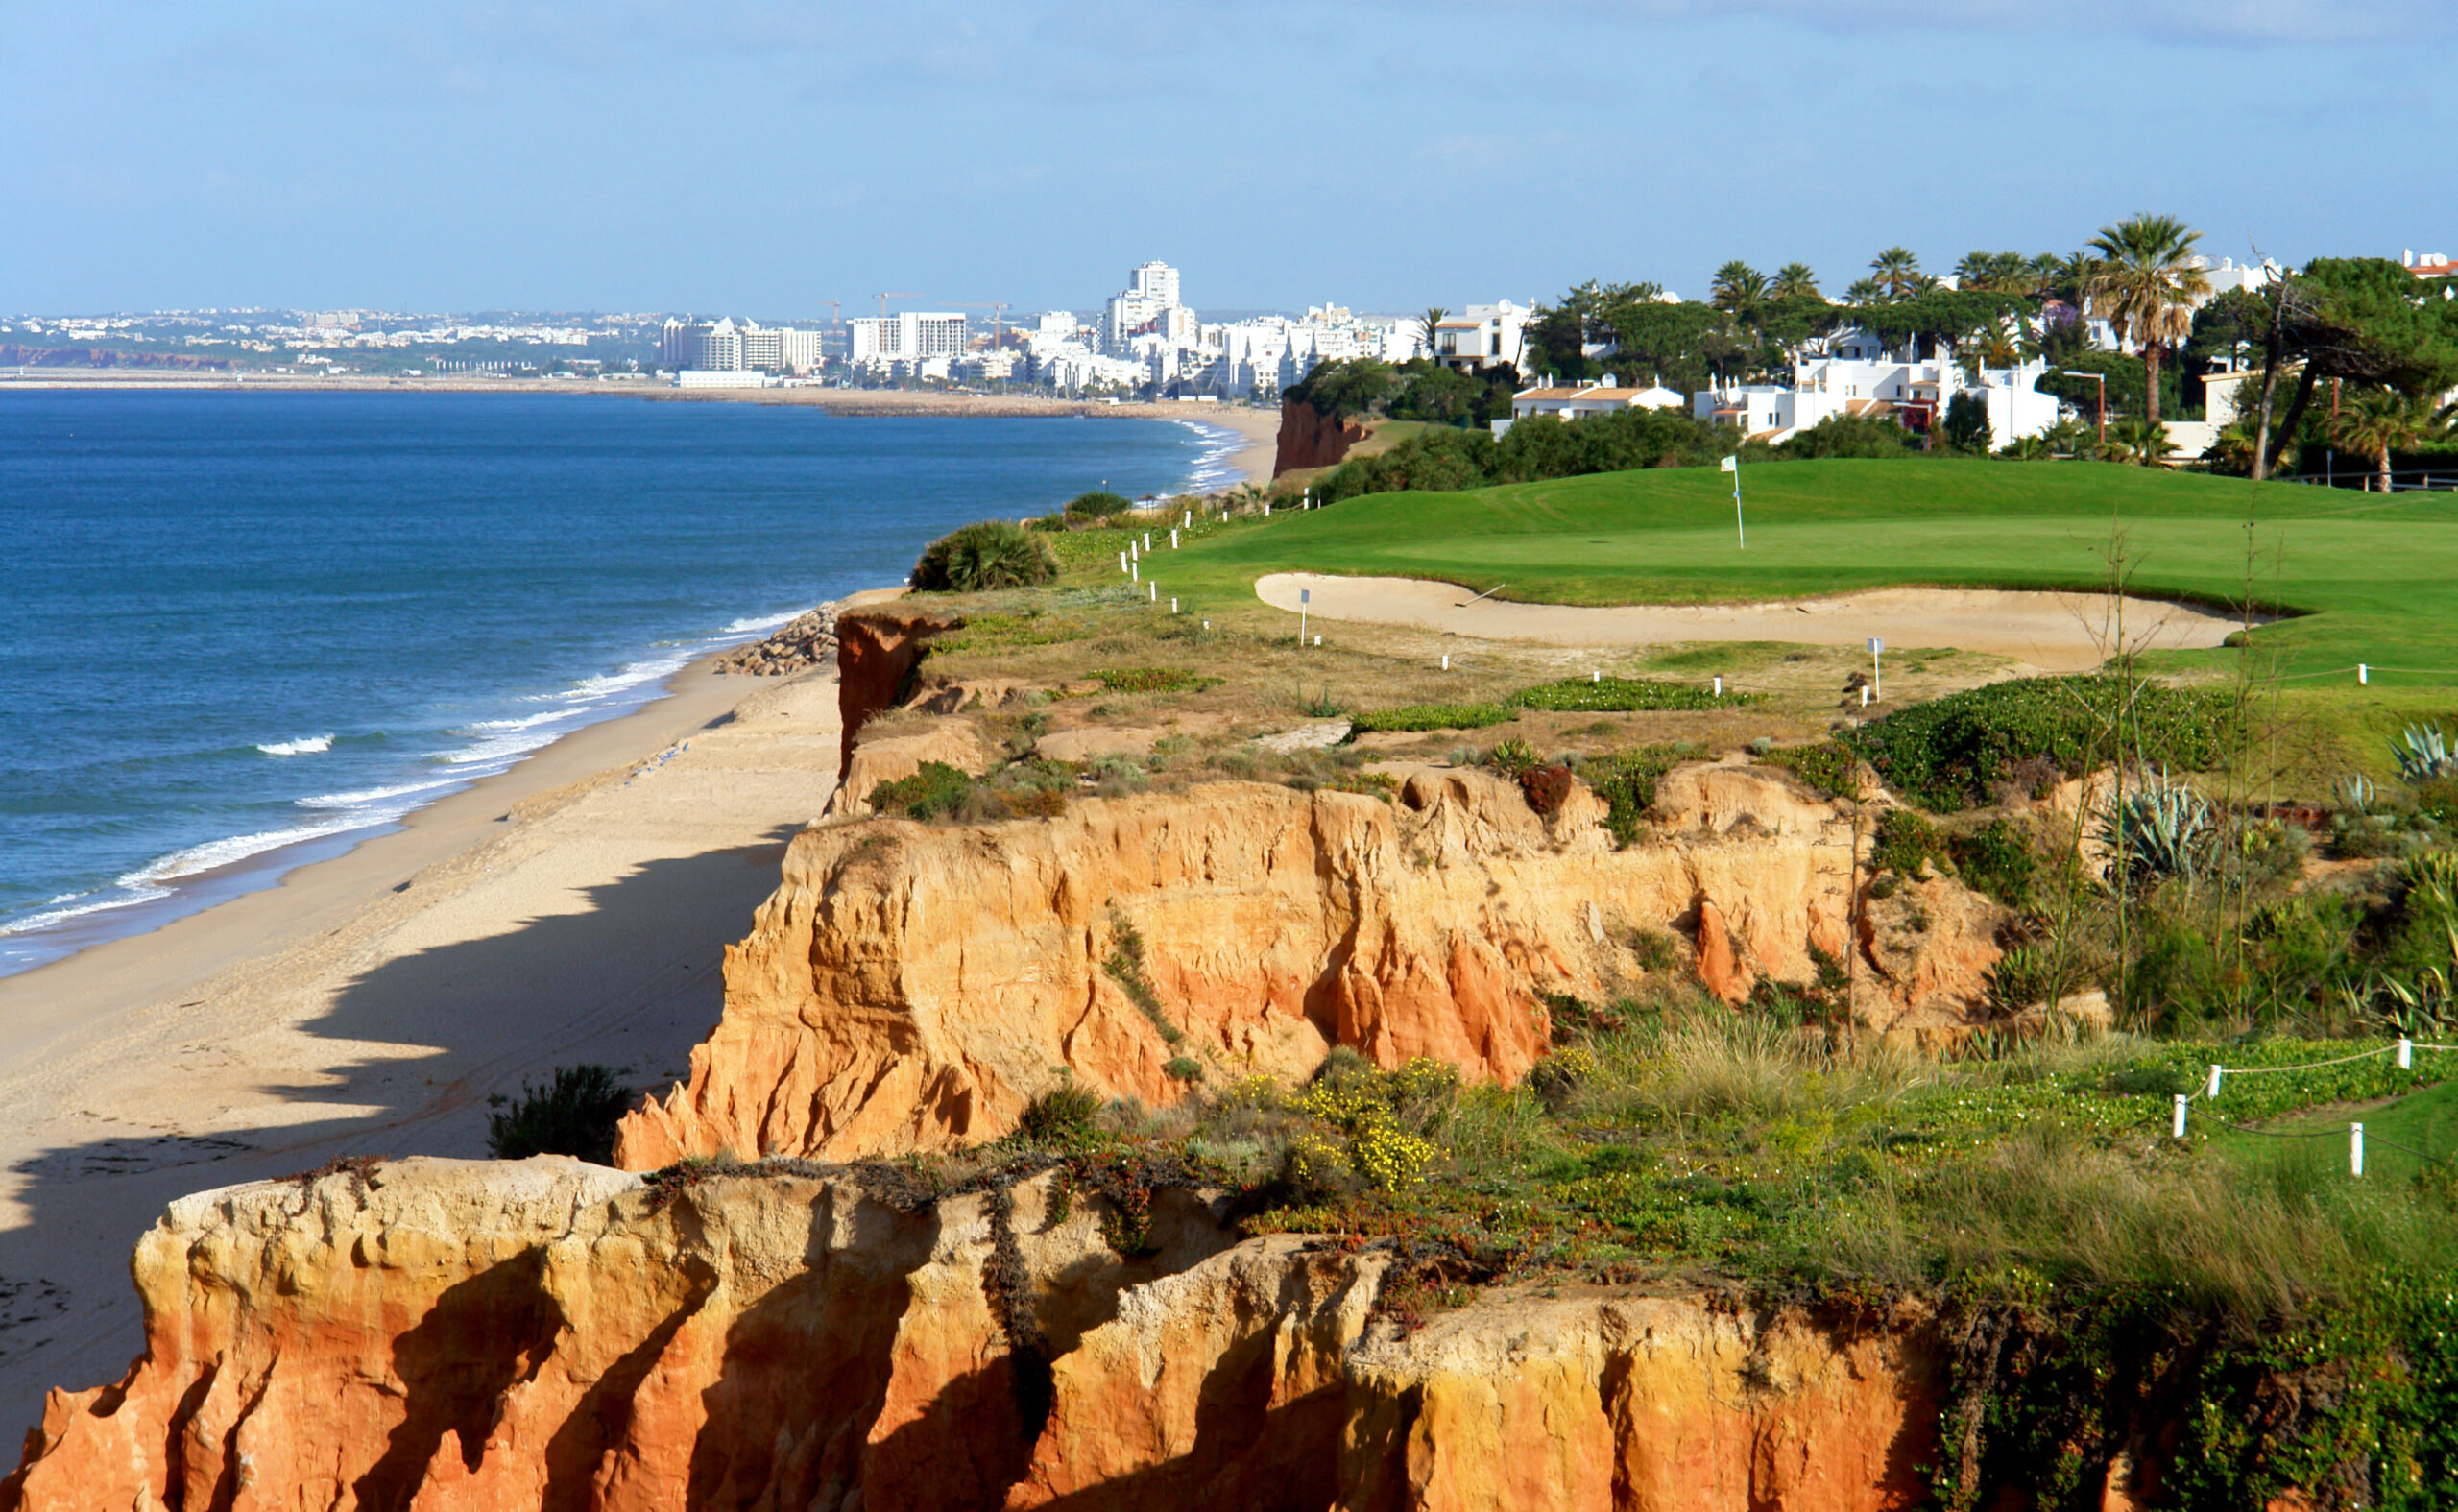 What Are the “Must Play” Golf Courses in Portugal?